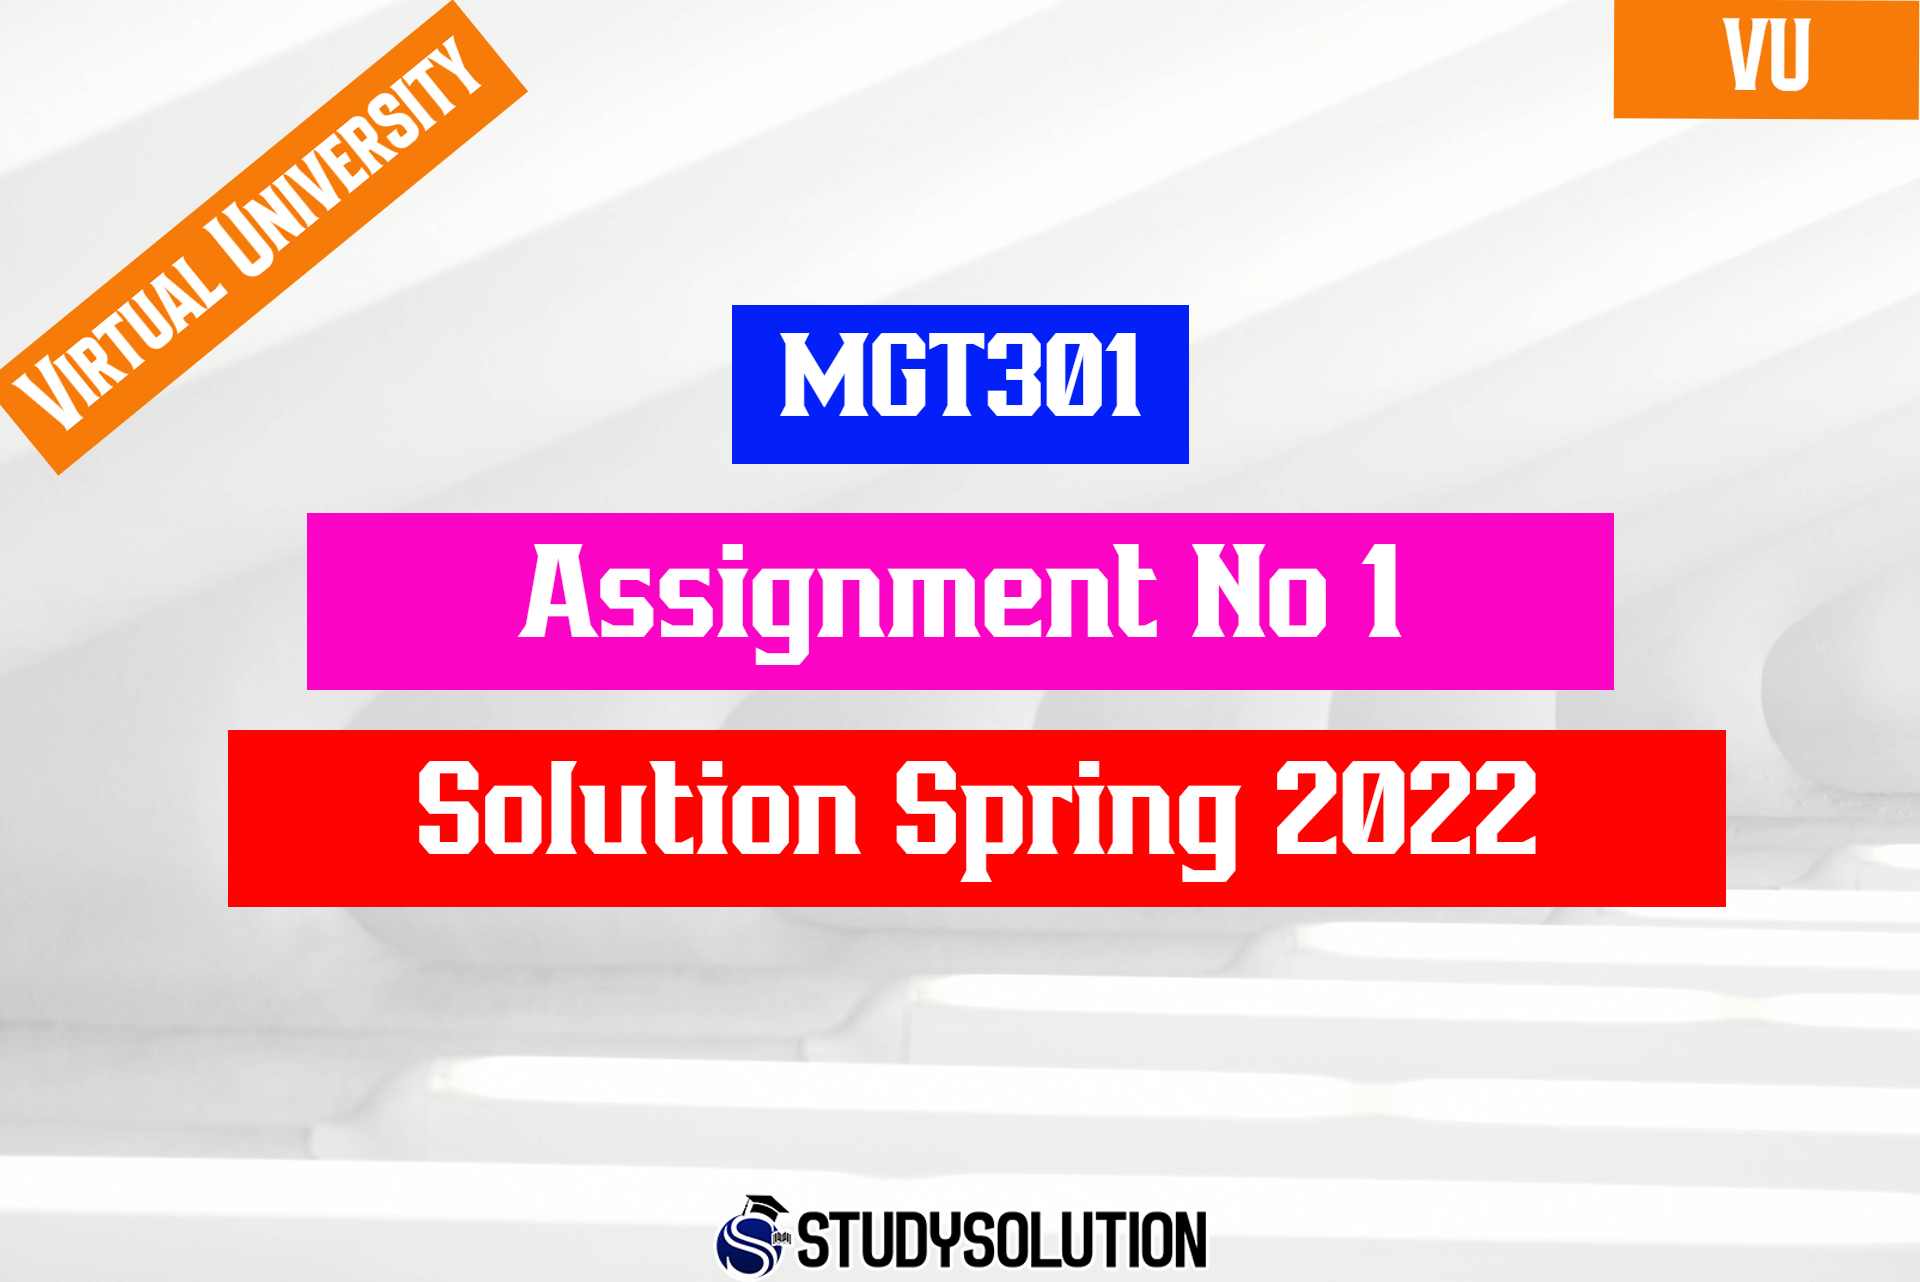 MGT301 Assignment No 1 Solution Spring 2022